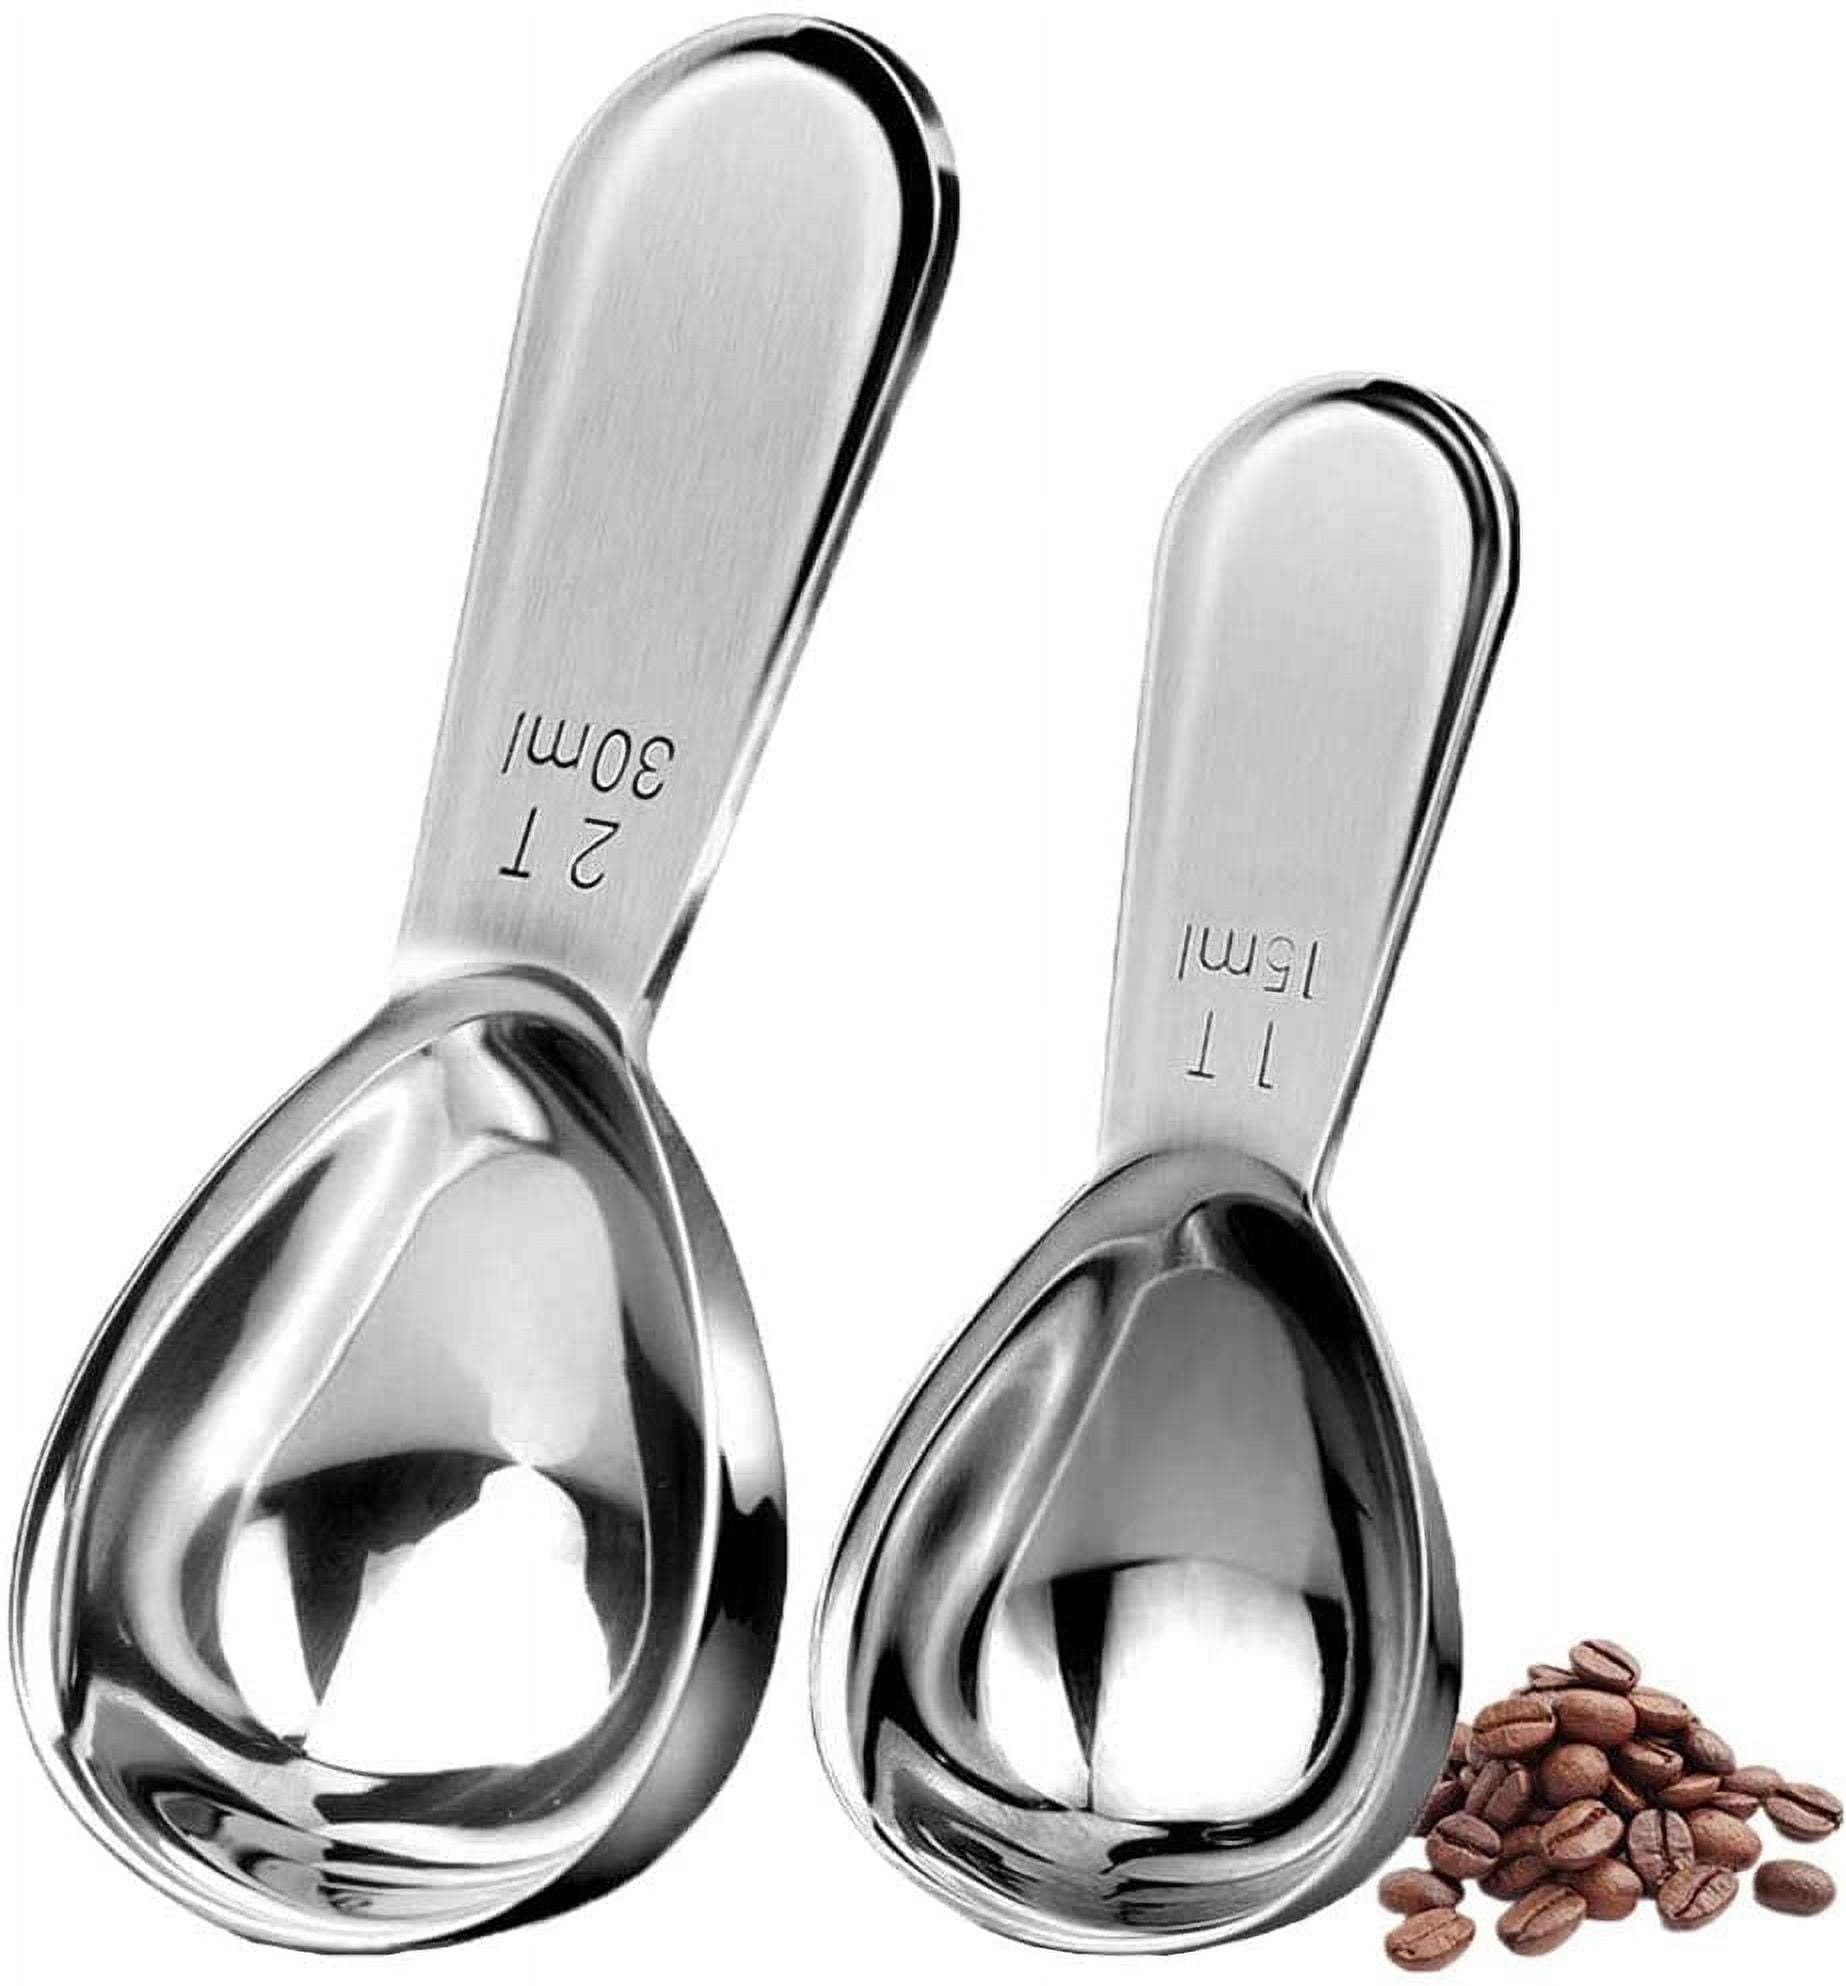  2lbDepot Tablespoon Measuring Spoon tbsp, Heavy-Duty Stainless  Steel, Narrow, Long Handle Fits in Spice Jar, One Table Spoon. : Baby